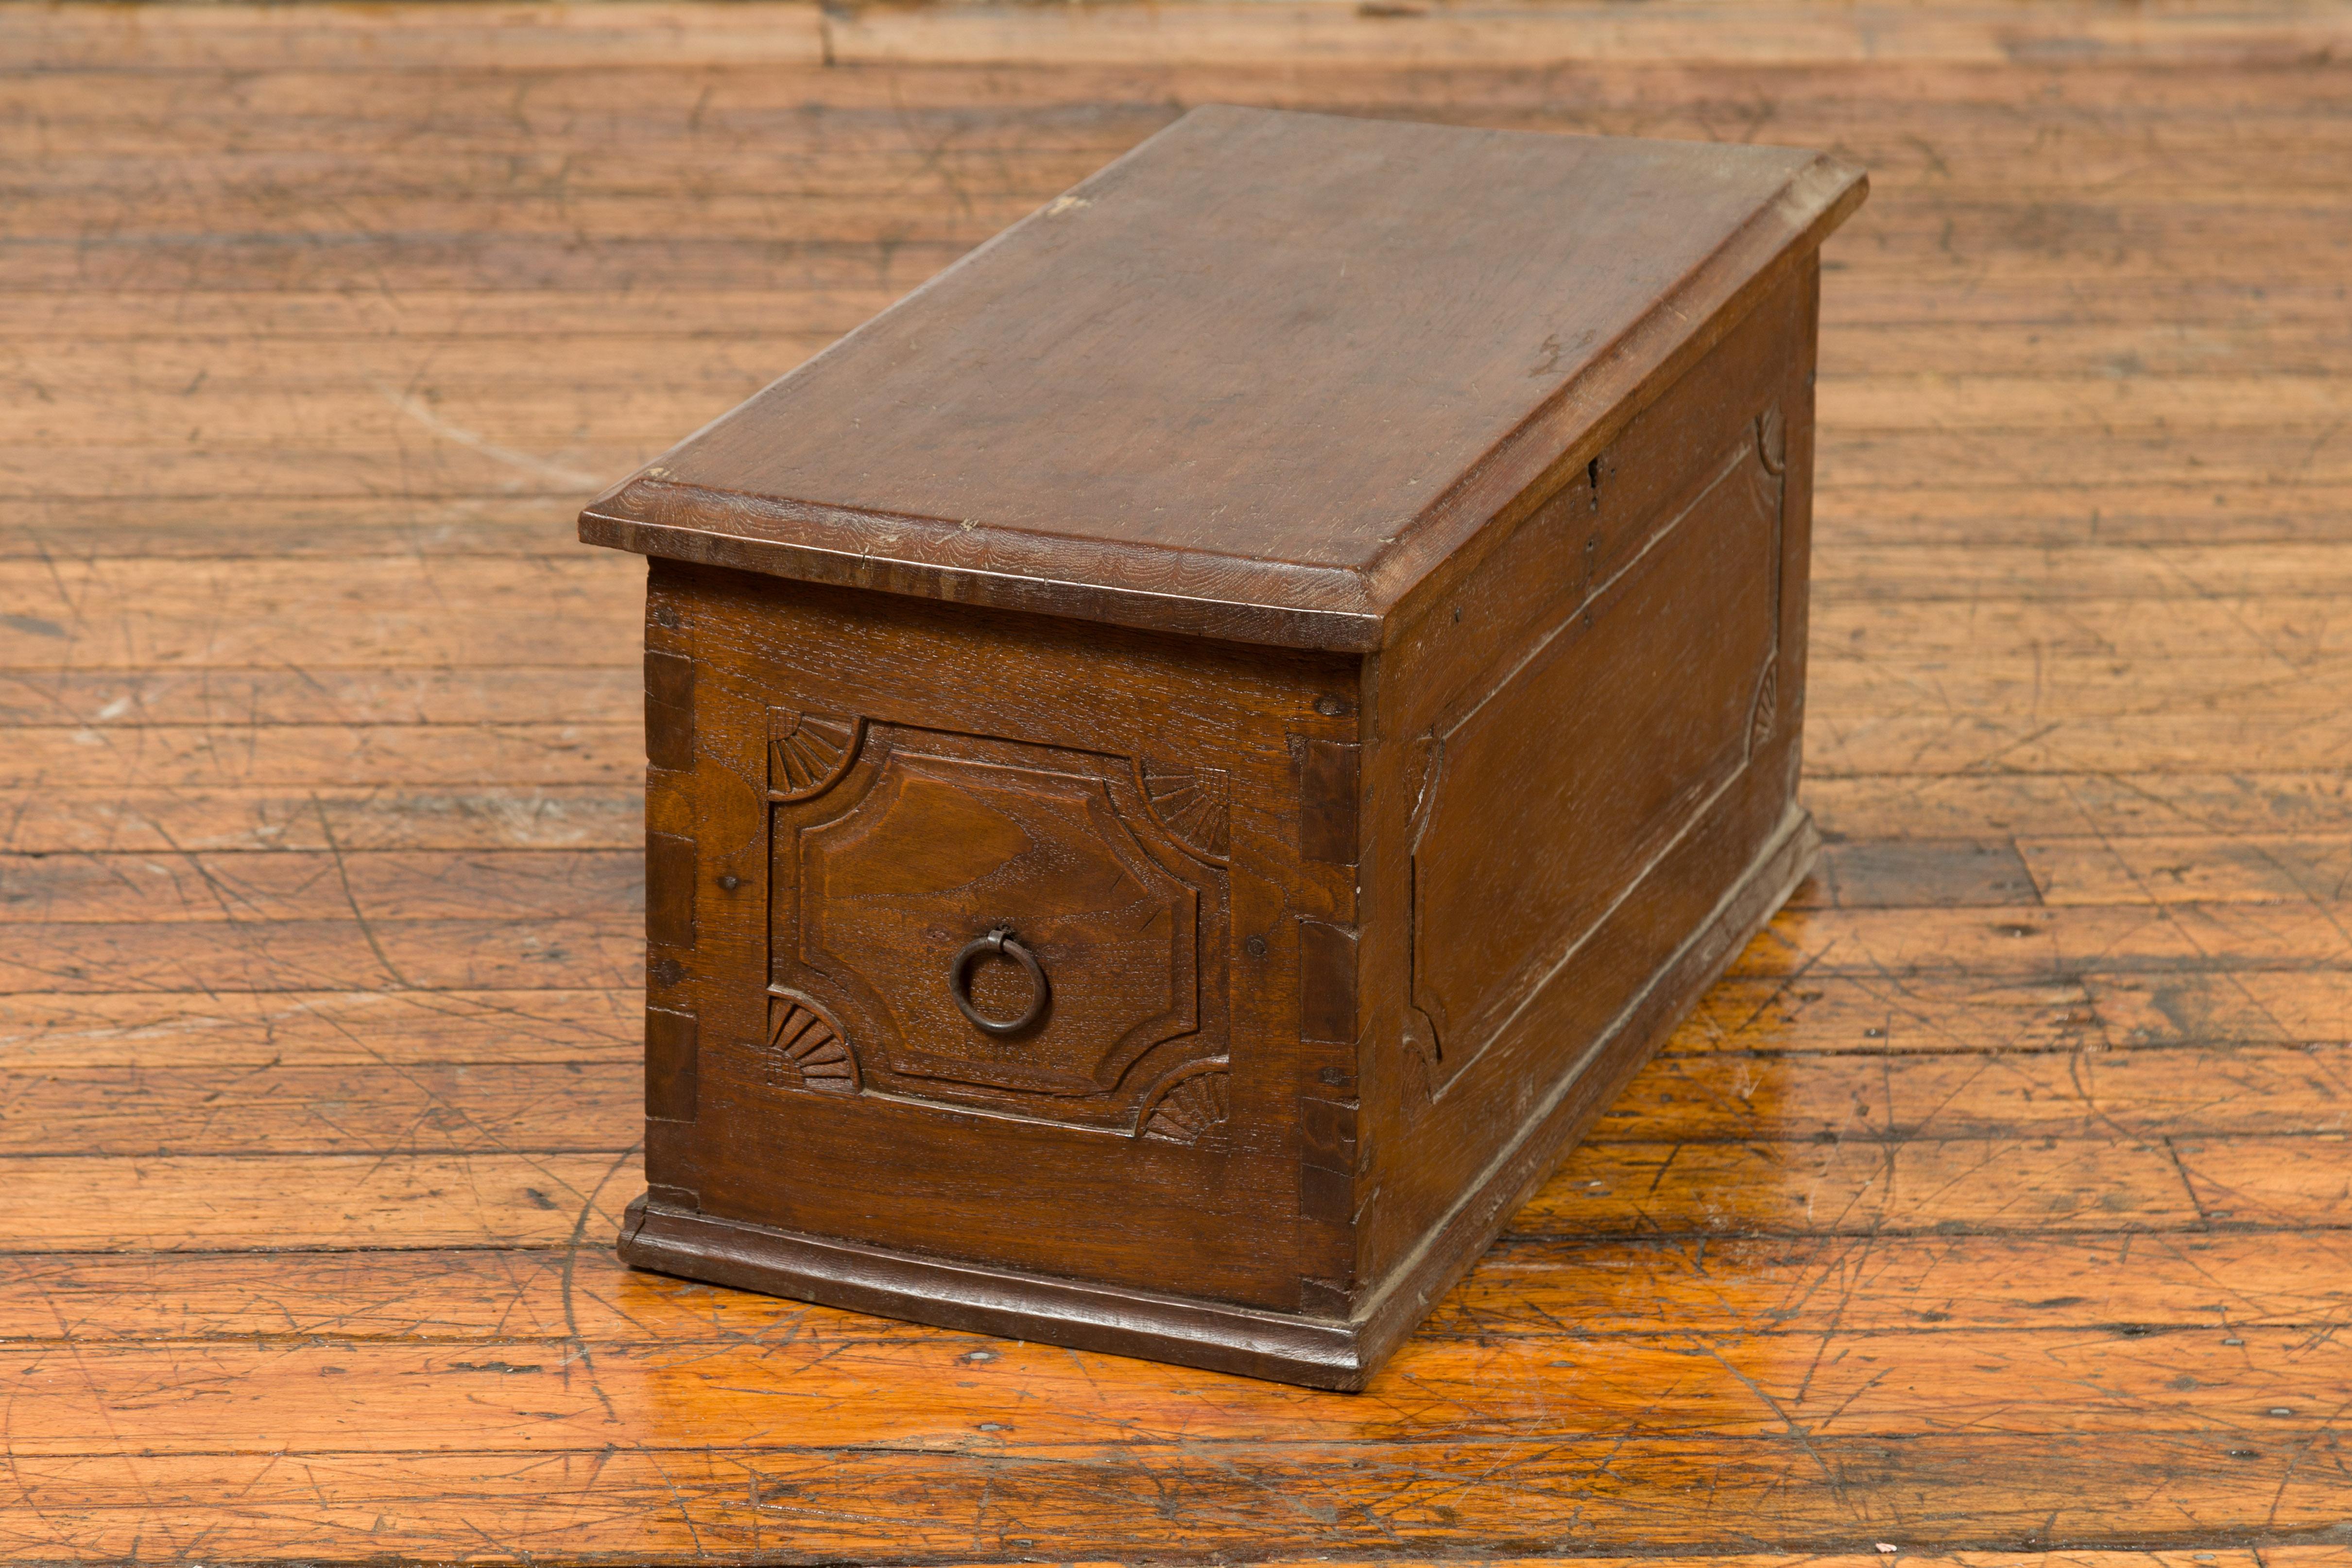 19th Century Dovetailed Wood Treasure Chest from Sumatra with Carved Fan Motifs 4